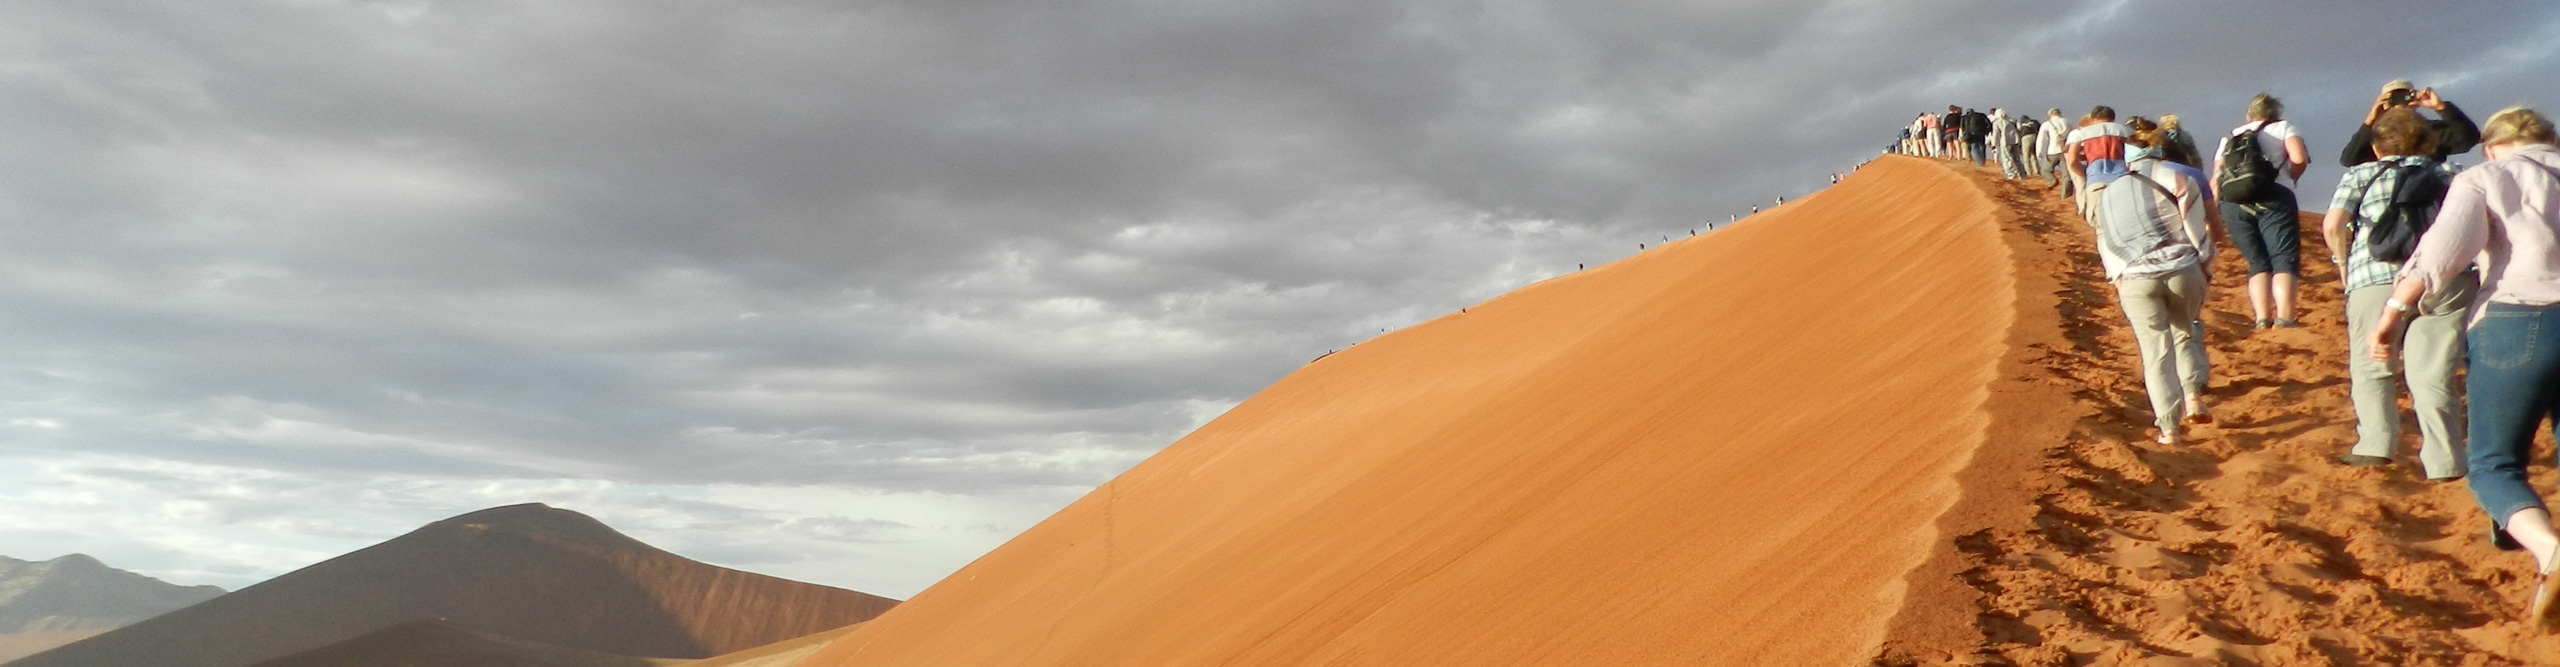 Group climb the dunes in Namibia on a cloudy day, Africa